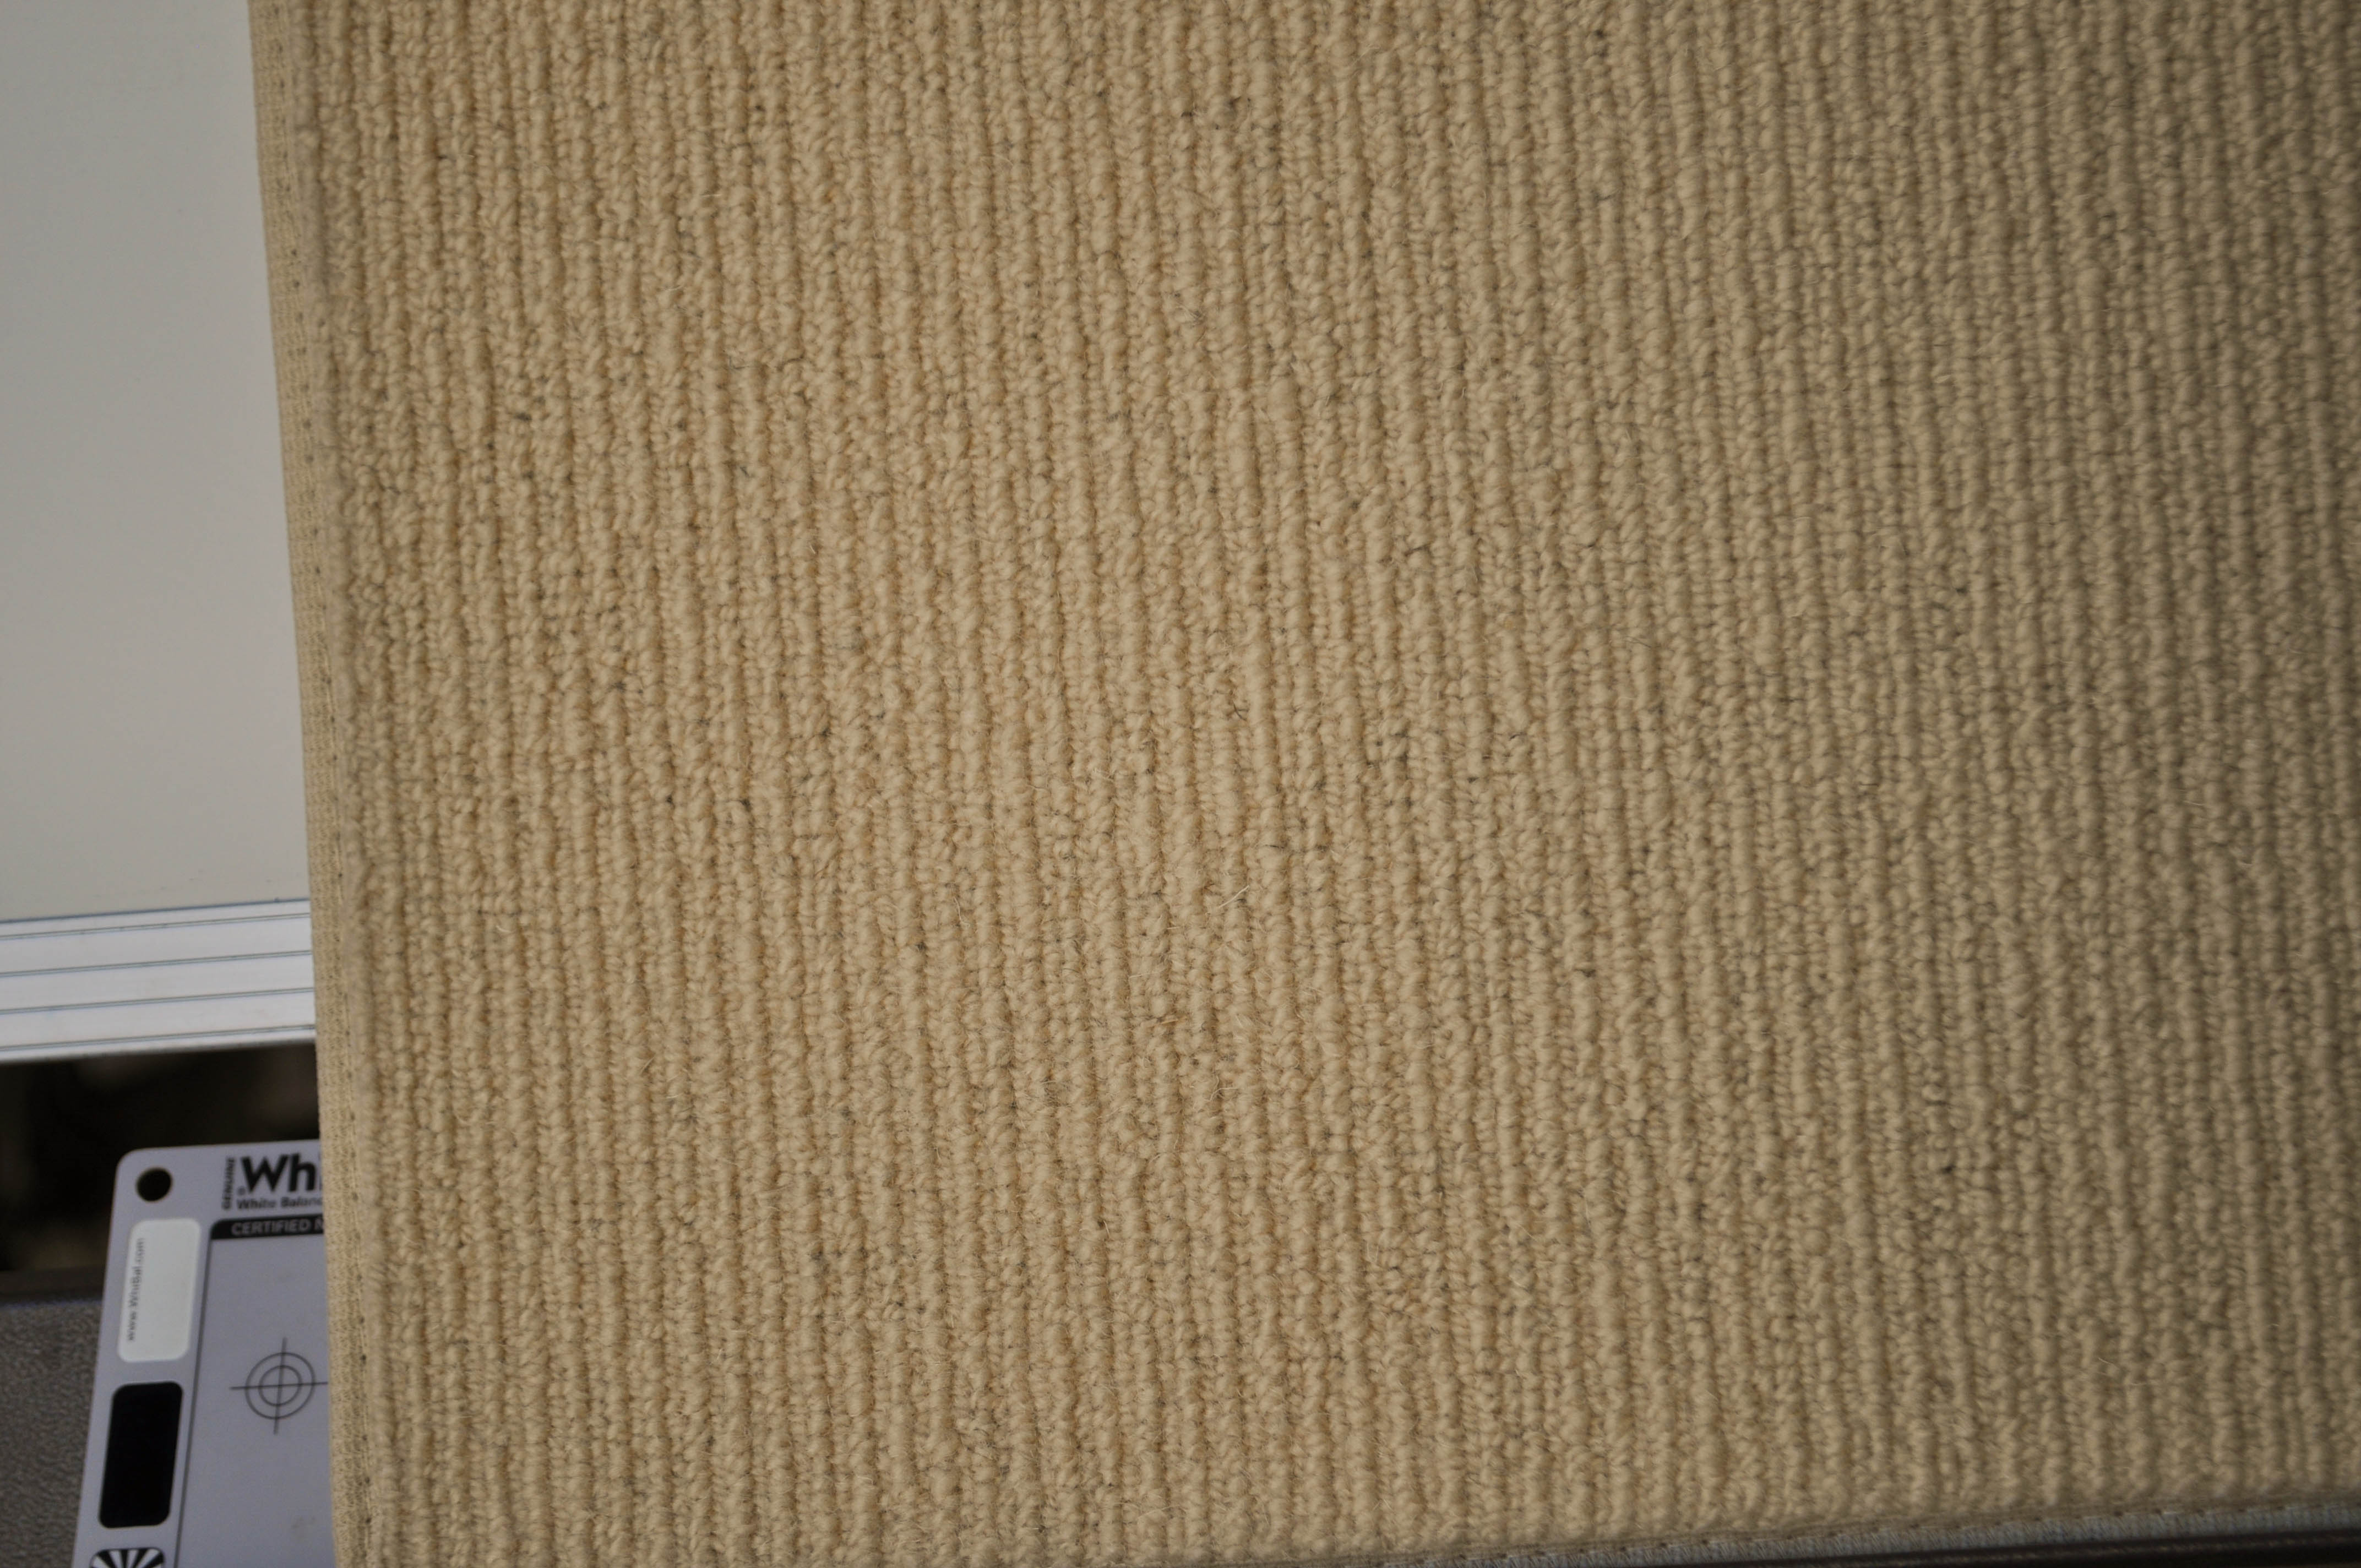 showing a sample of carpet, it being of a  cream color, tram trek, wool yarn carpet on sale at Concord Floors.